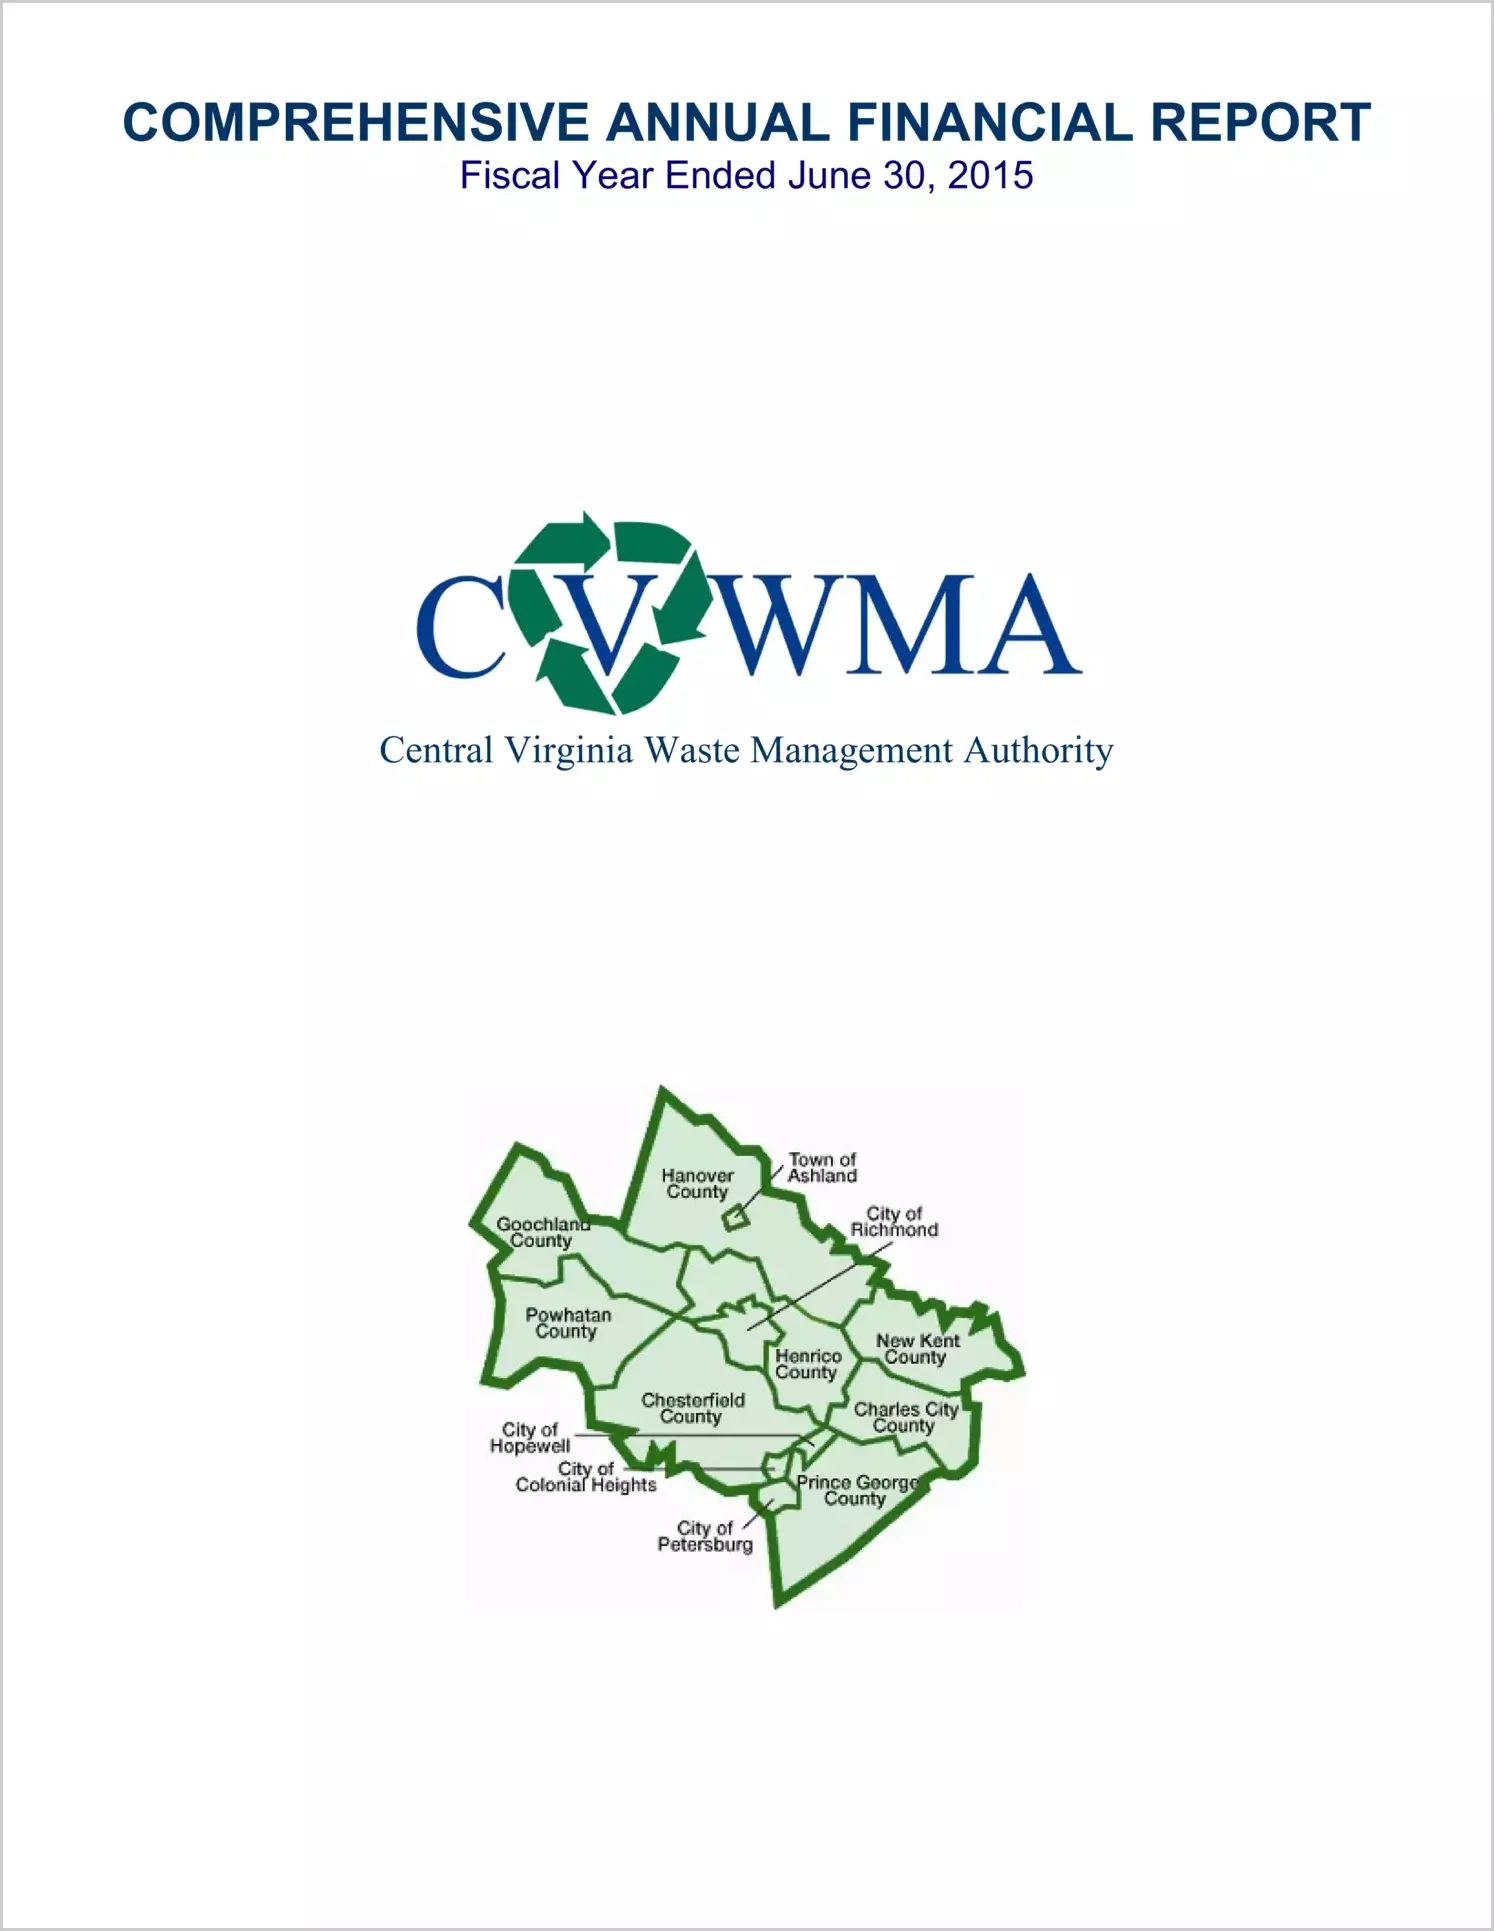 2015 ABC/Other Annual Financial Report  for Central Virginia Waste Management Authority